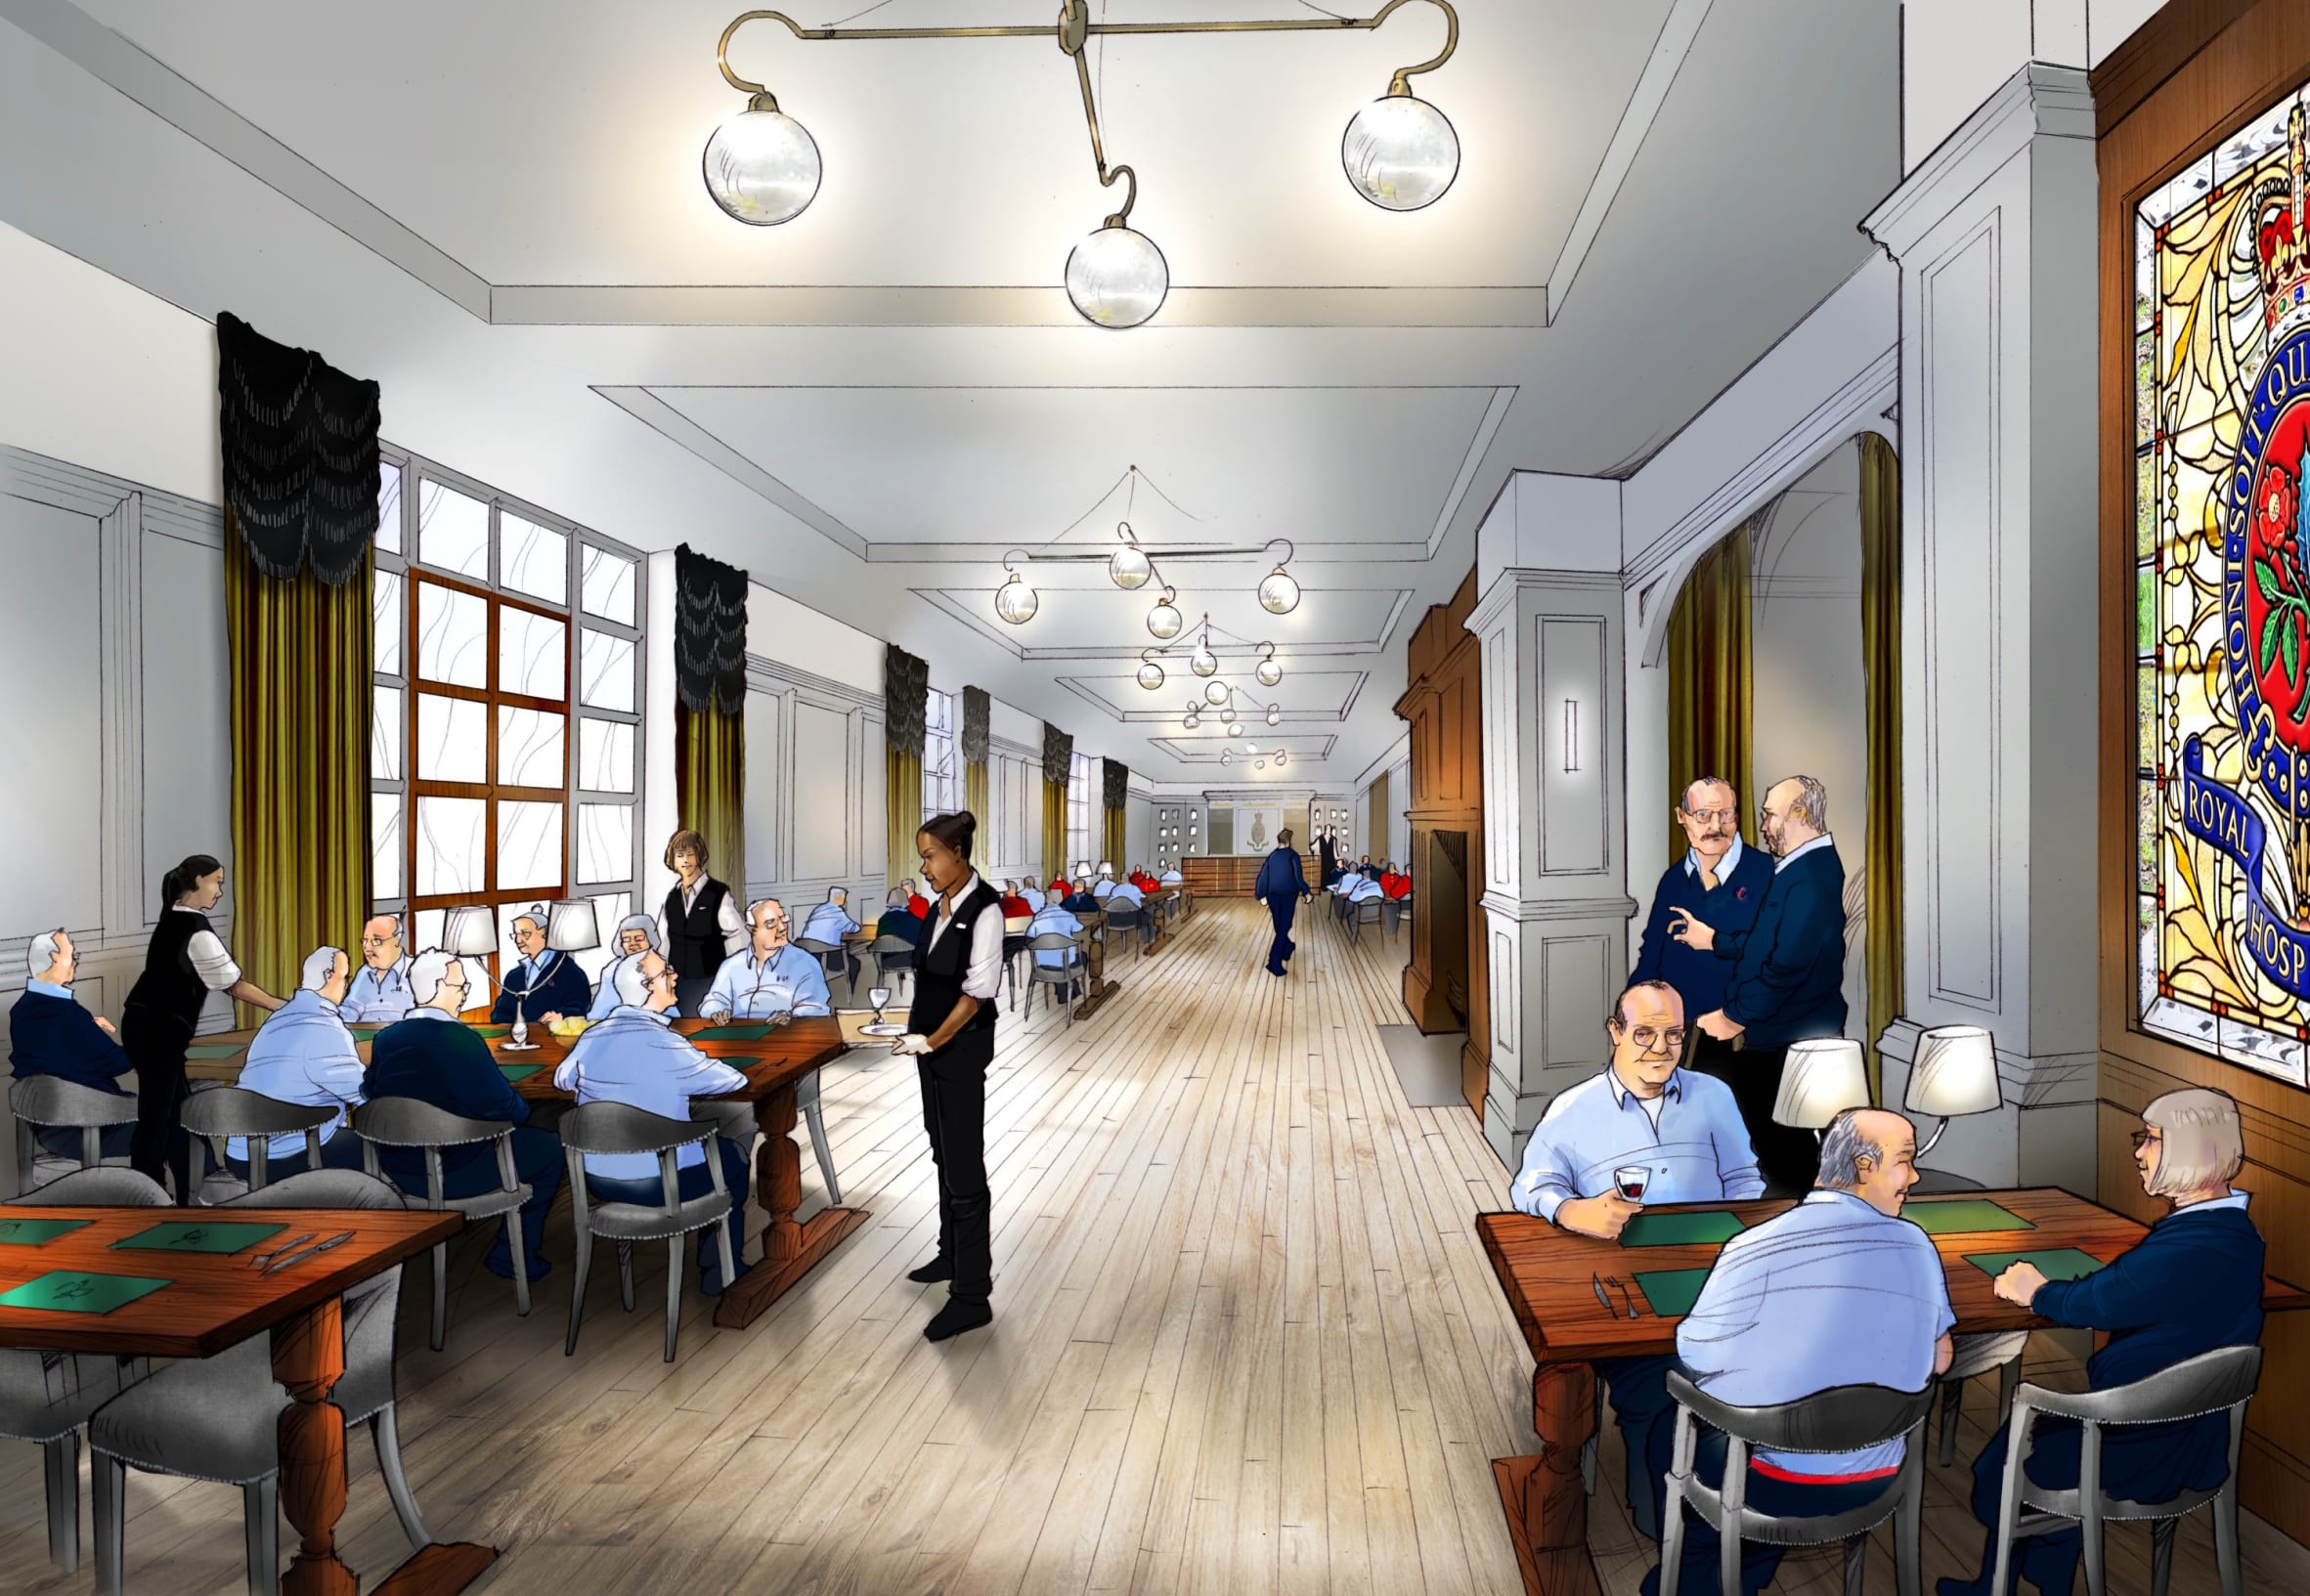 A new dining hall in the Long Wards will re-create the traditional Great Hall experience for Infirmary residents